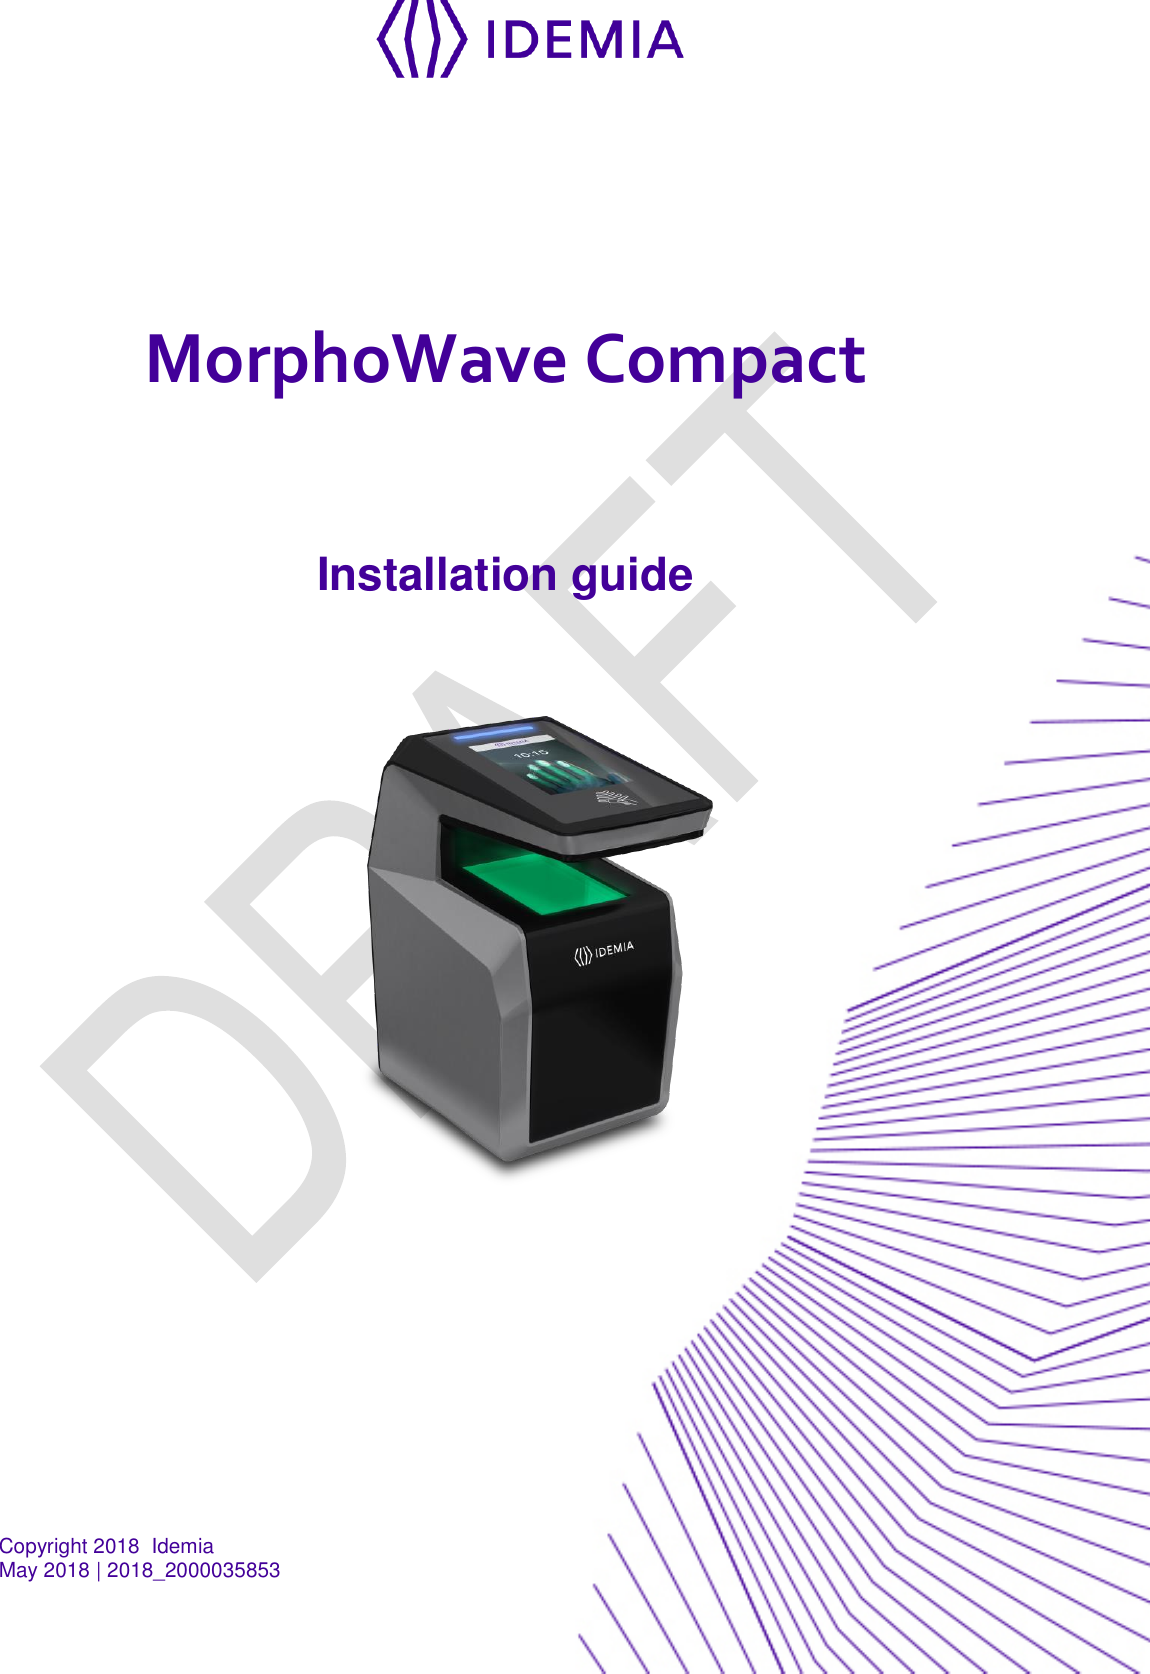  Copyright 2018  Idemia May 2018 | 2018_2000035853                           MorphoWave Compact  Installation guide  